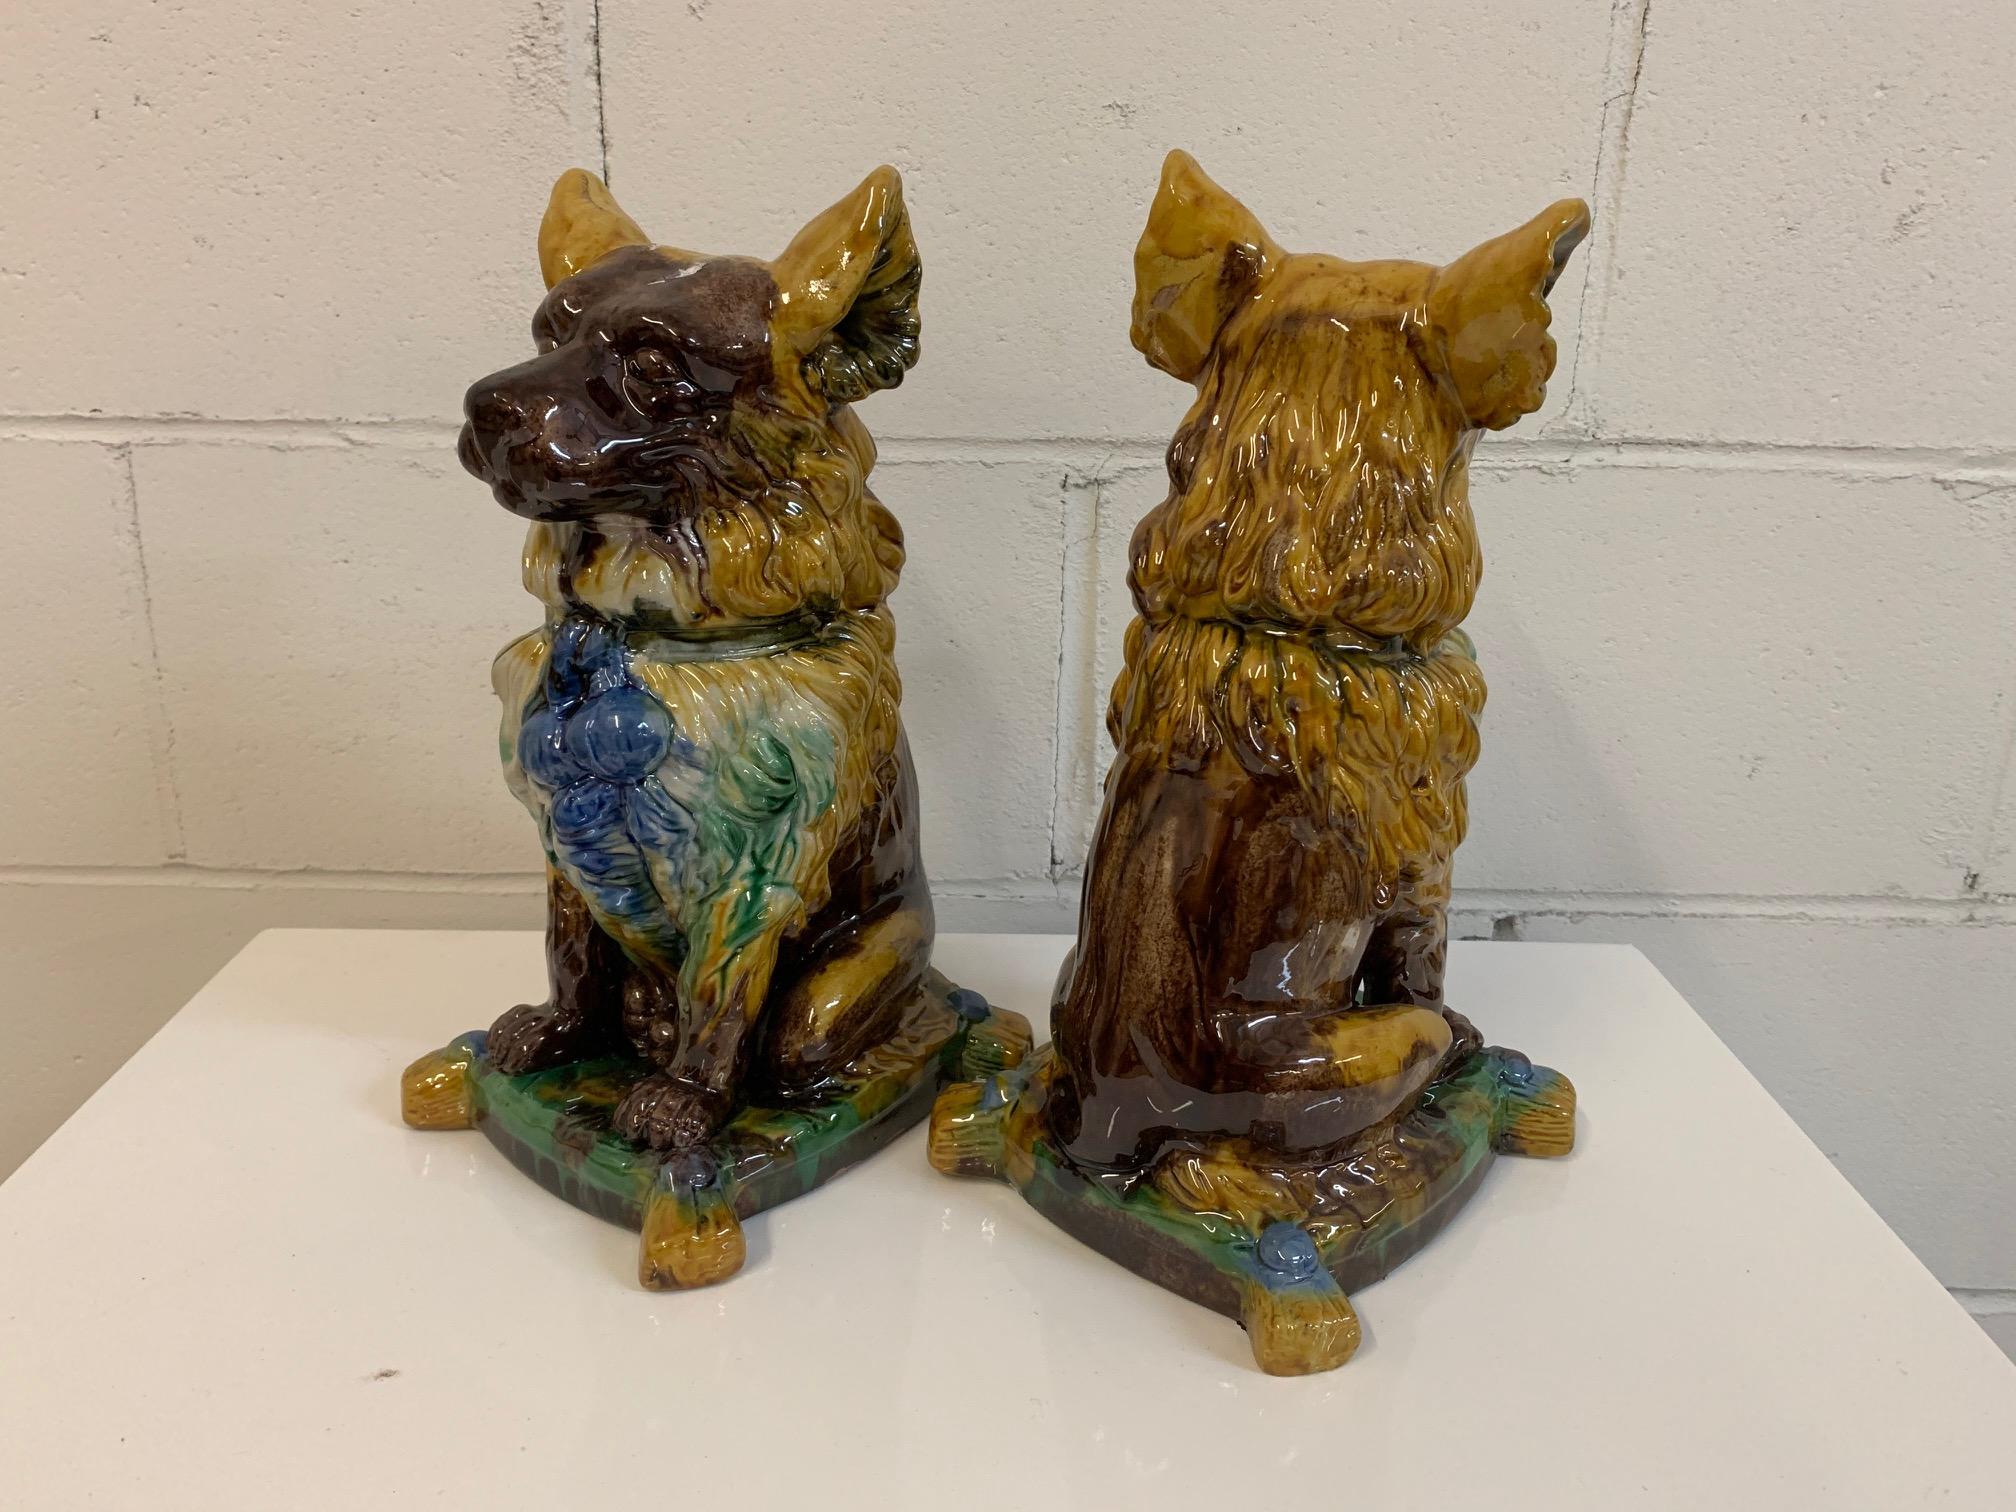 Pair of ceramic dog figurines perfect can be used as bookends or as standalone Objet d'arts. Very good condition with no flaws other than natural firing and glazing marks.